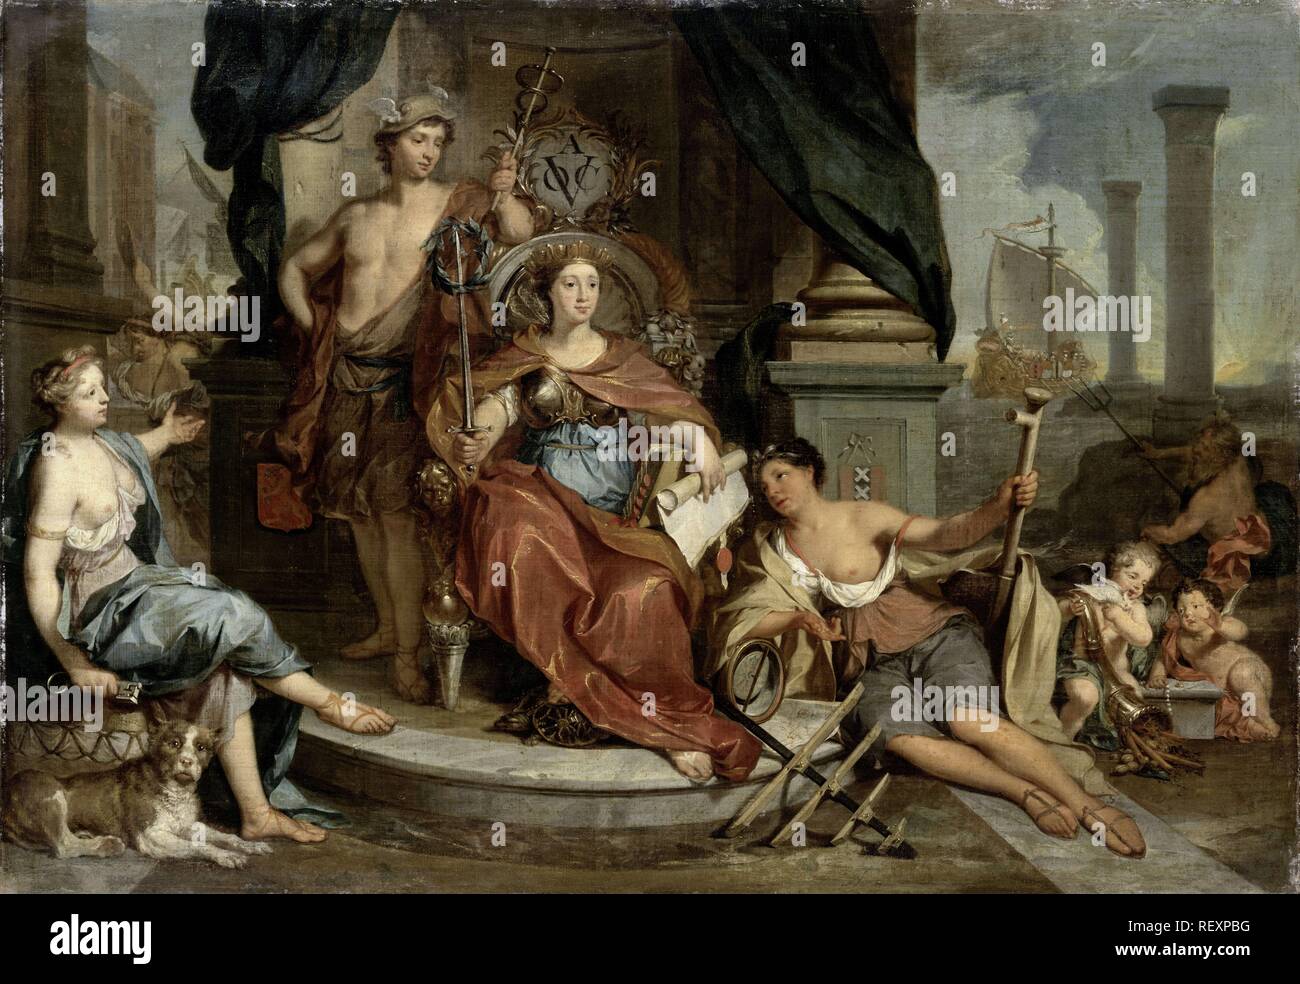 Apotheosis of the Dutch East India Company (Allegory of the Amsterdam Chamber of Commerce of the VOC). Dating: 1702 - 1746. Measurements: h 59.5 cm × w 85 cm. Museum: Rijksmuseum, Amsterdam. Author: Nicolaas Verkolje. Stock Photo